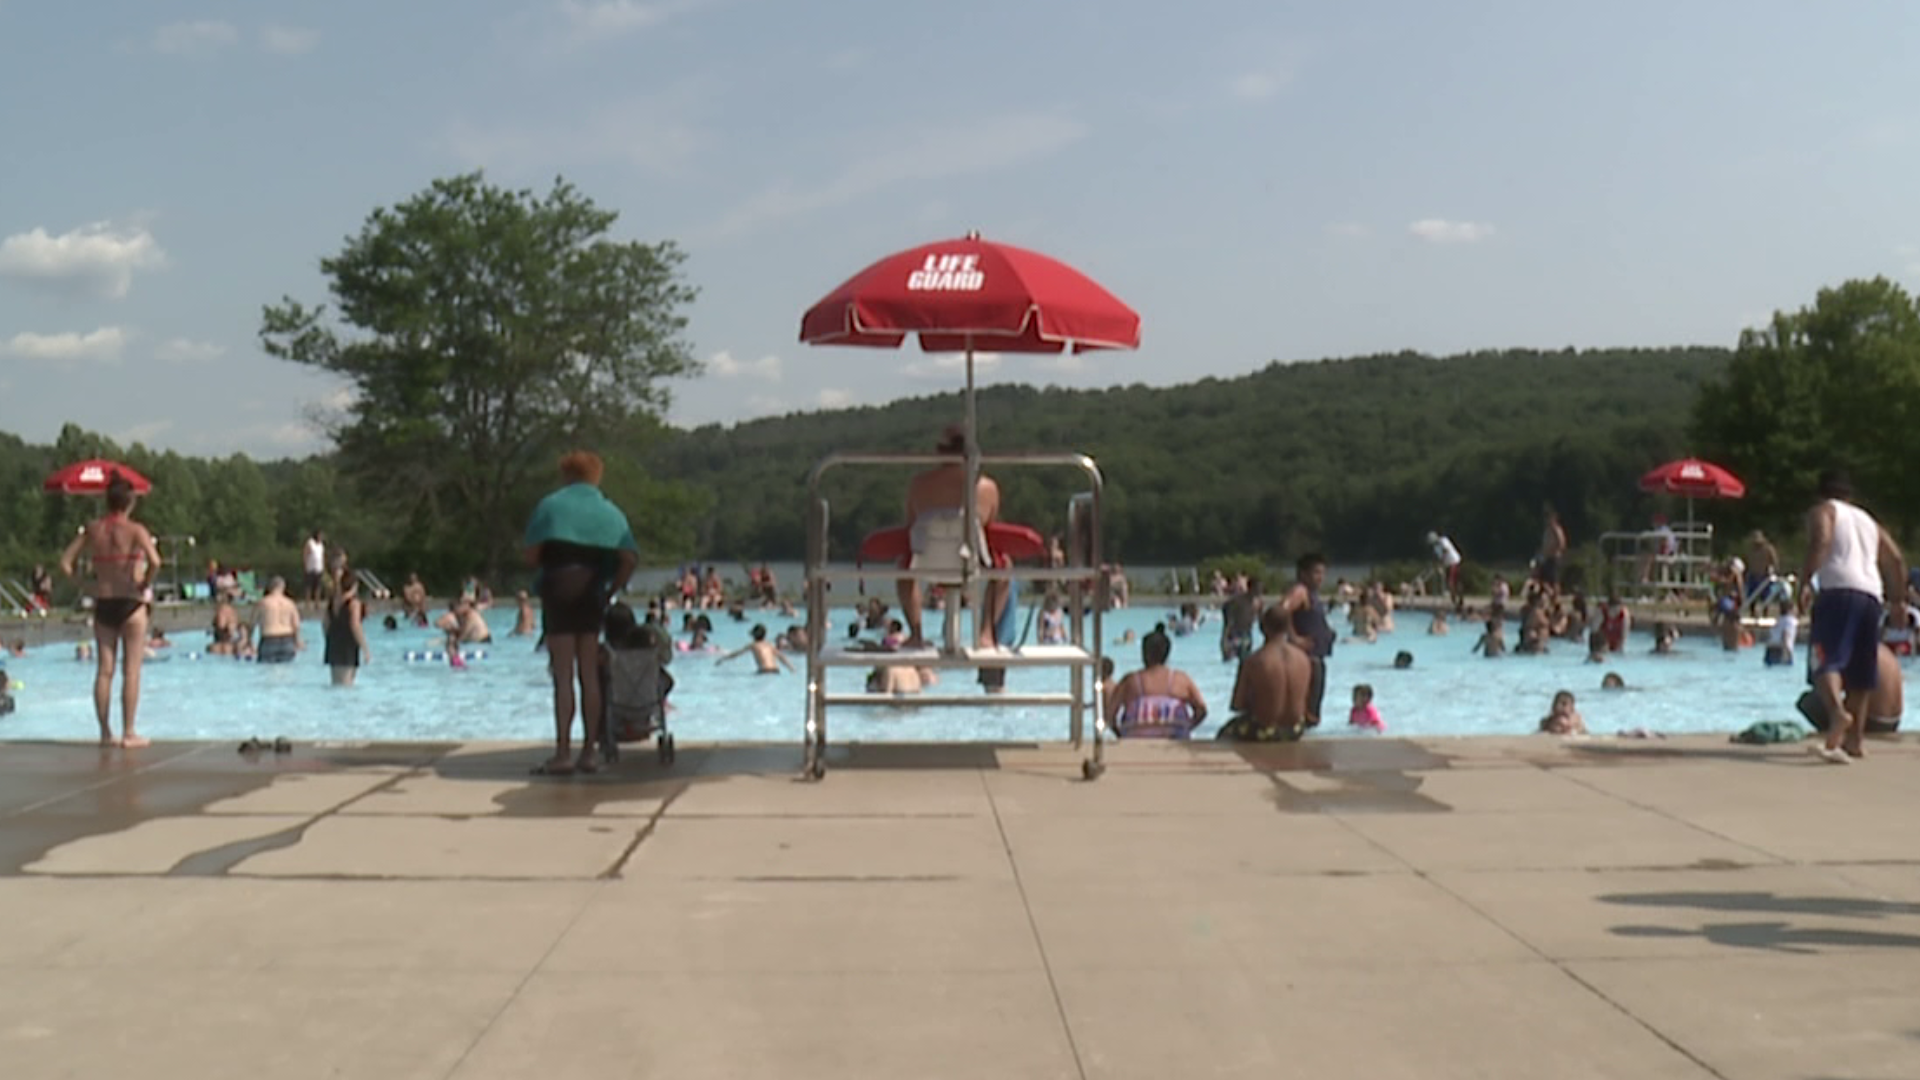 The state thought the pool wouldn't be opened this summer due to a lifeguard shortage.